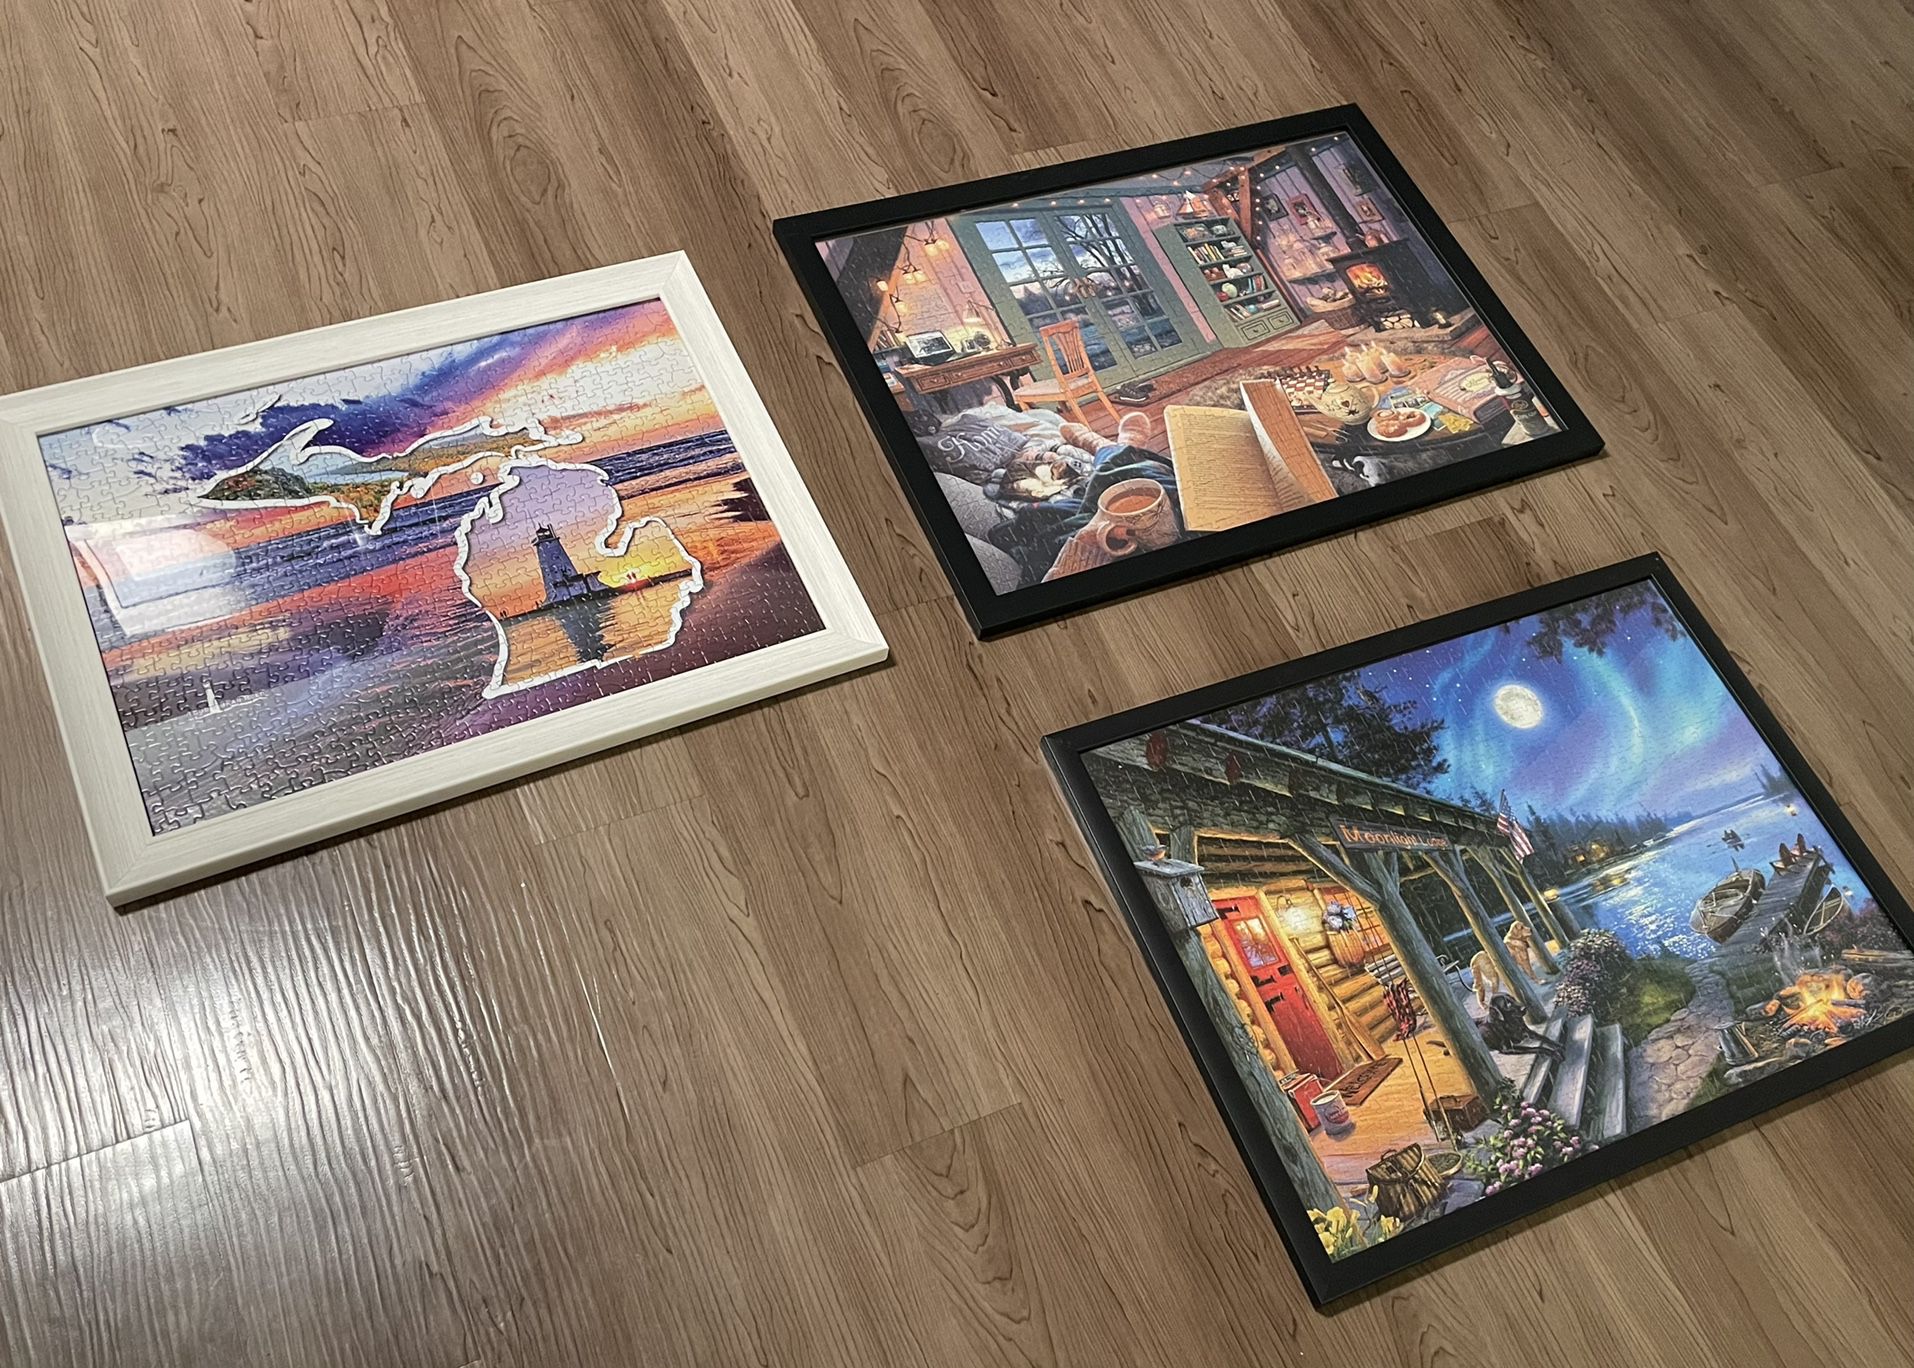 Completed Puzzles In Frames